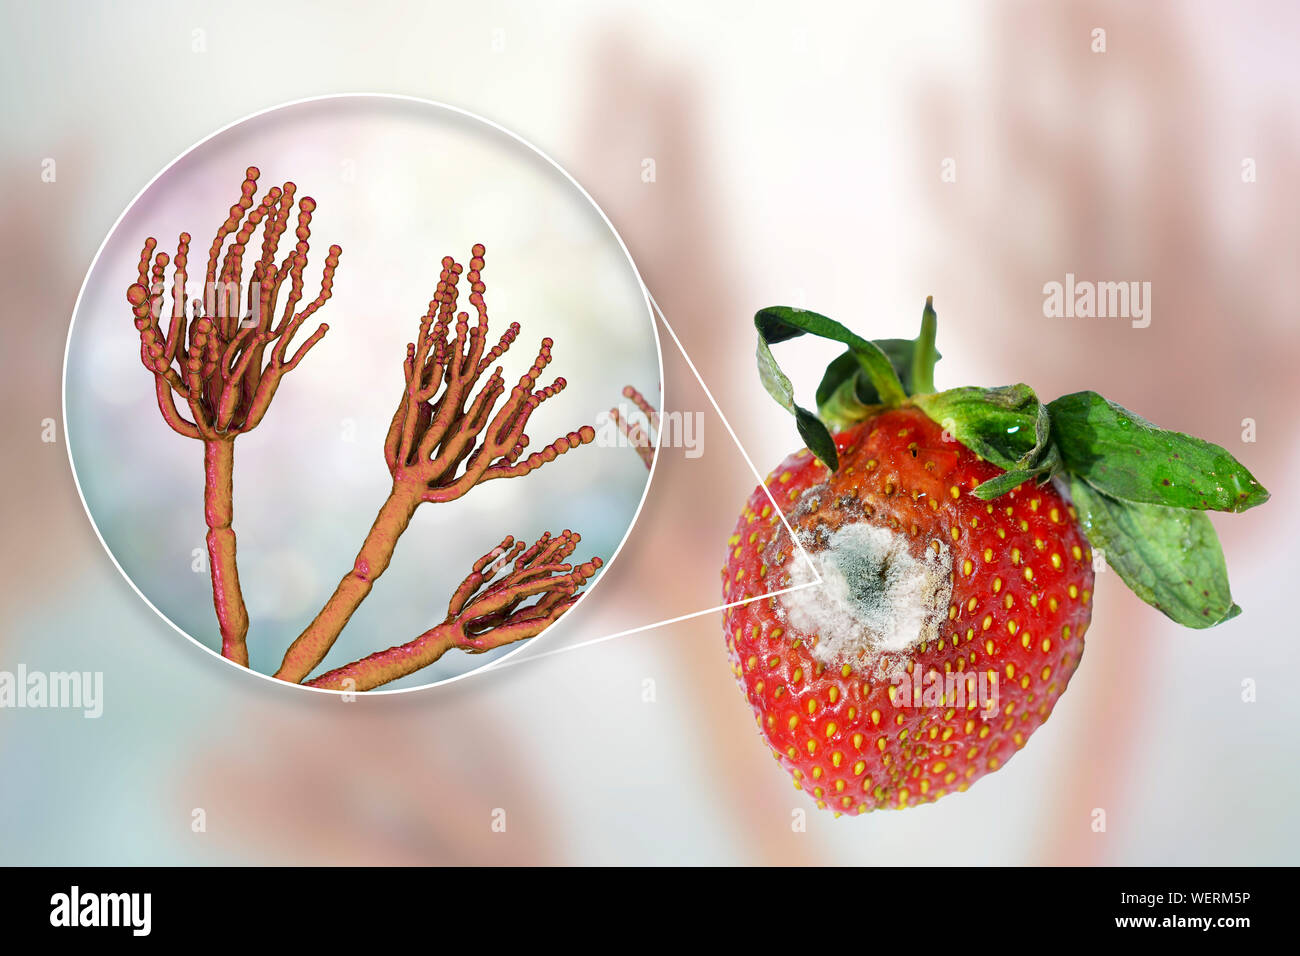 Strawberry covered with mould, composite image Stock Photo